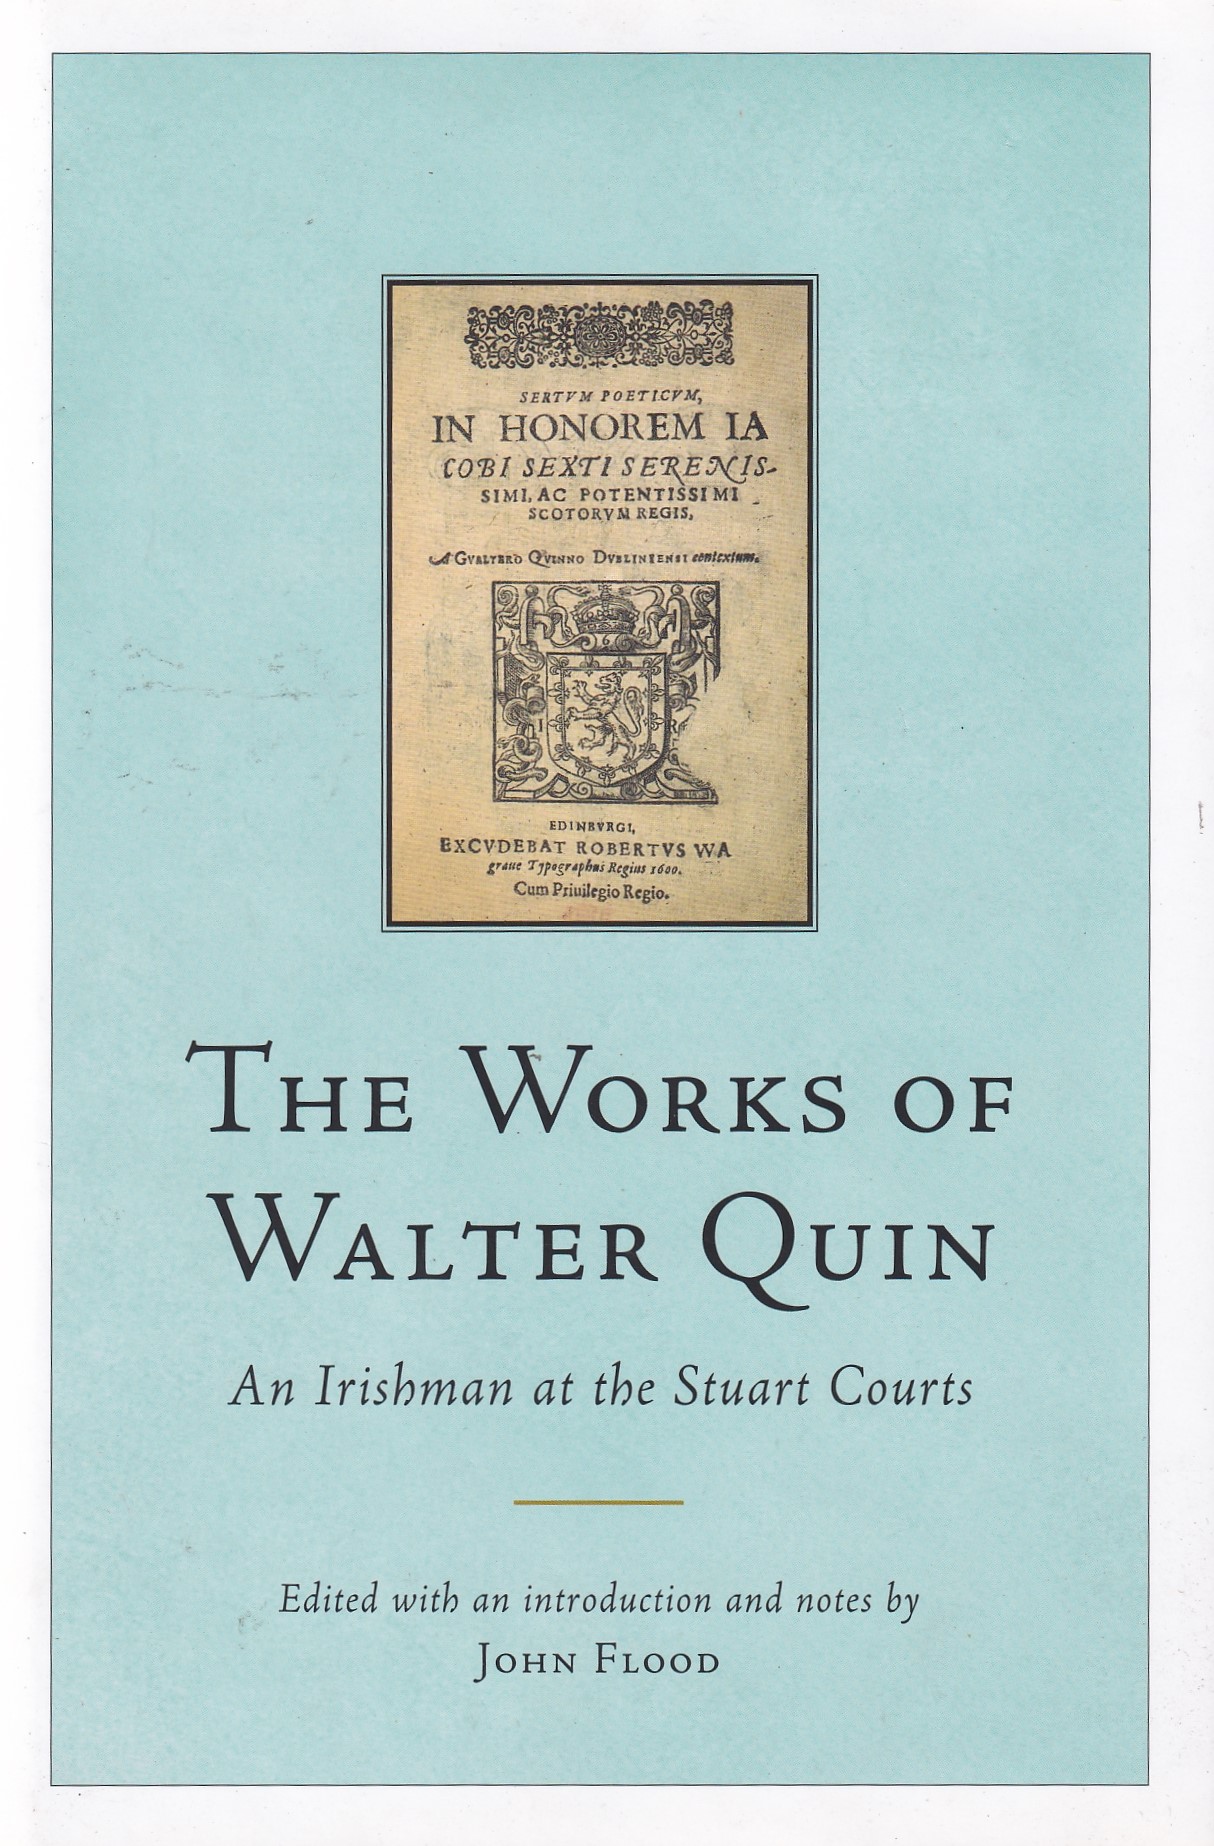 The Works of Walter Quin: An Irishman at the Stuart Courts | John Flood | Charlie Byrne's